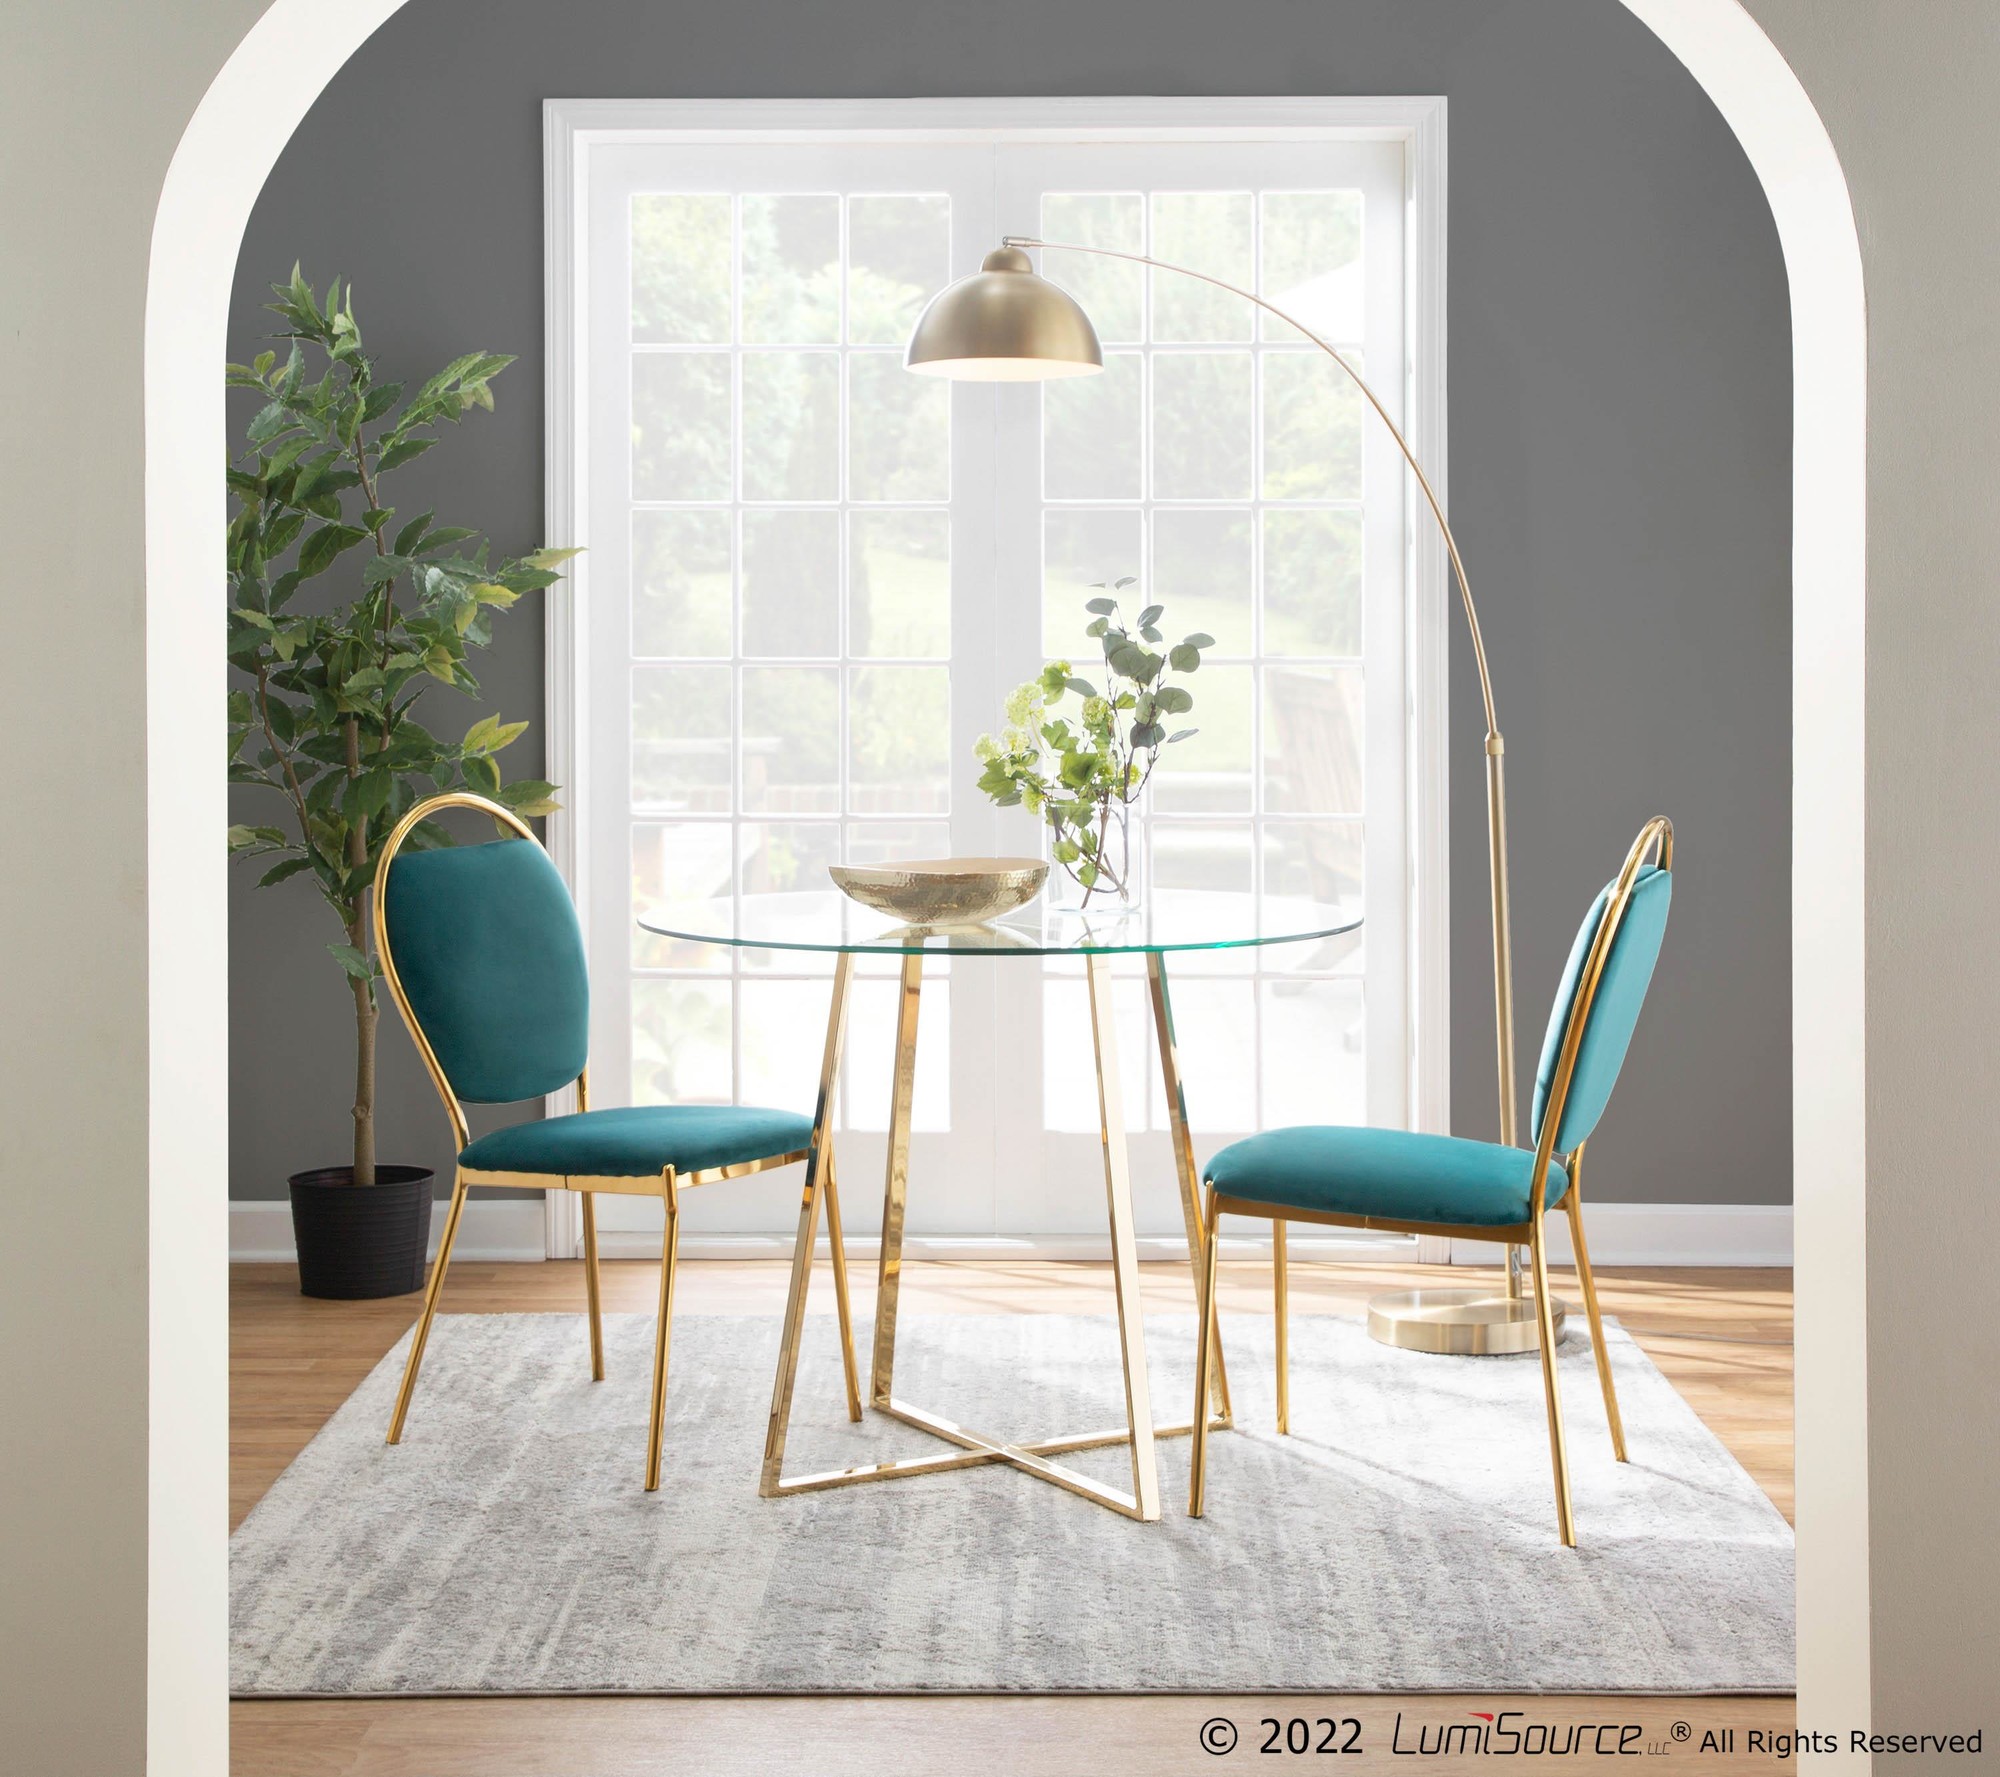 Keyhole Dining Chair - Set Of 2